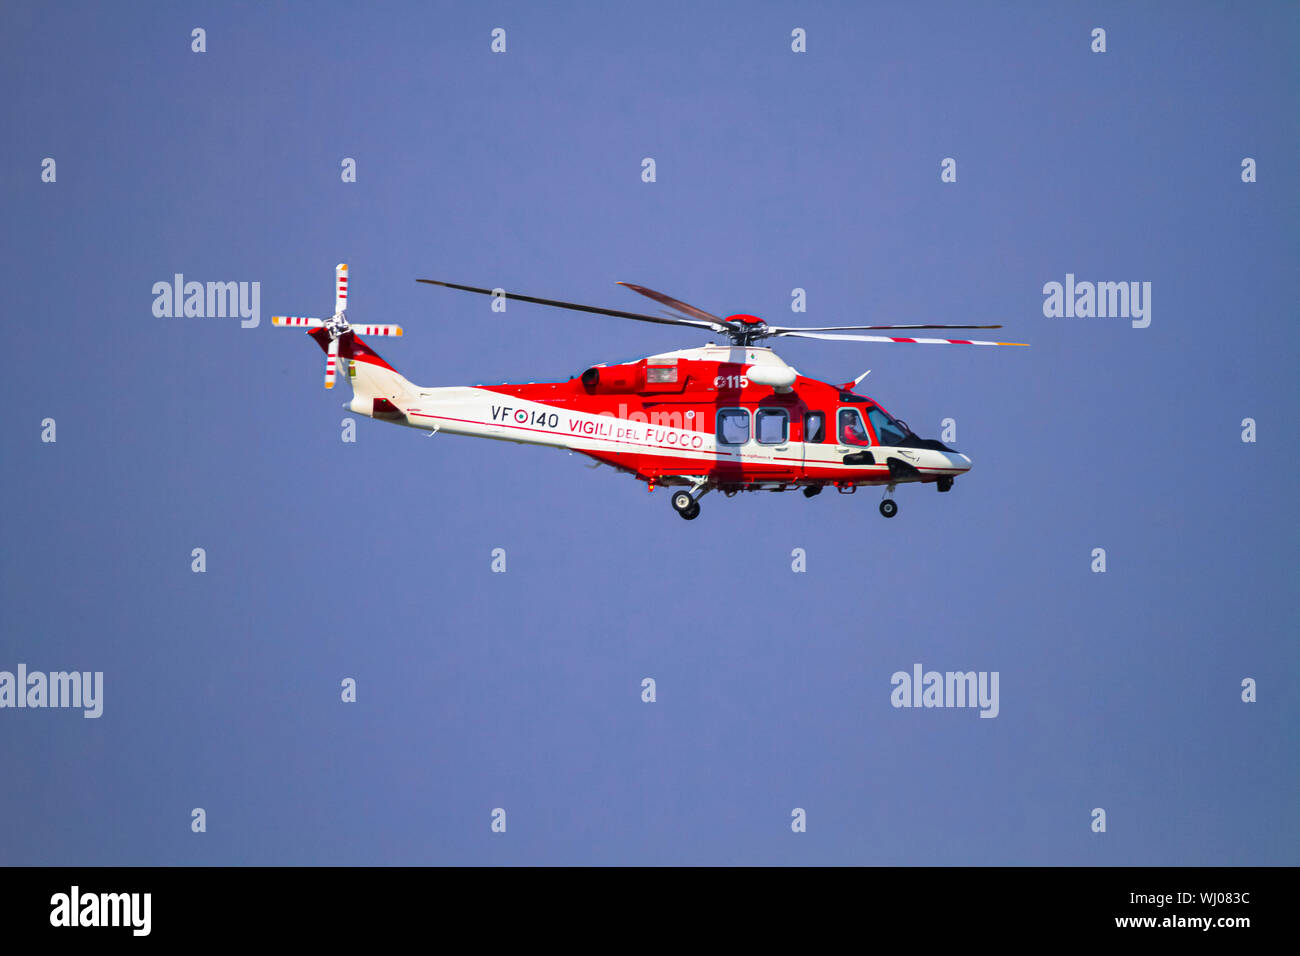 Fire fighter's helicopter AgustaWestland AW139 (VF-140) in flight Photographed in Malpensa, Milan, Italy Stock Photo